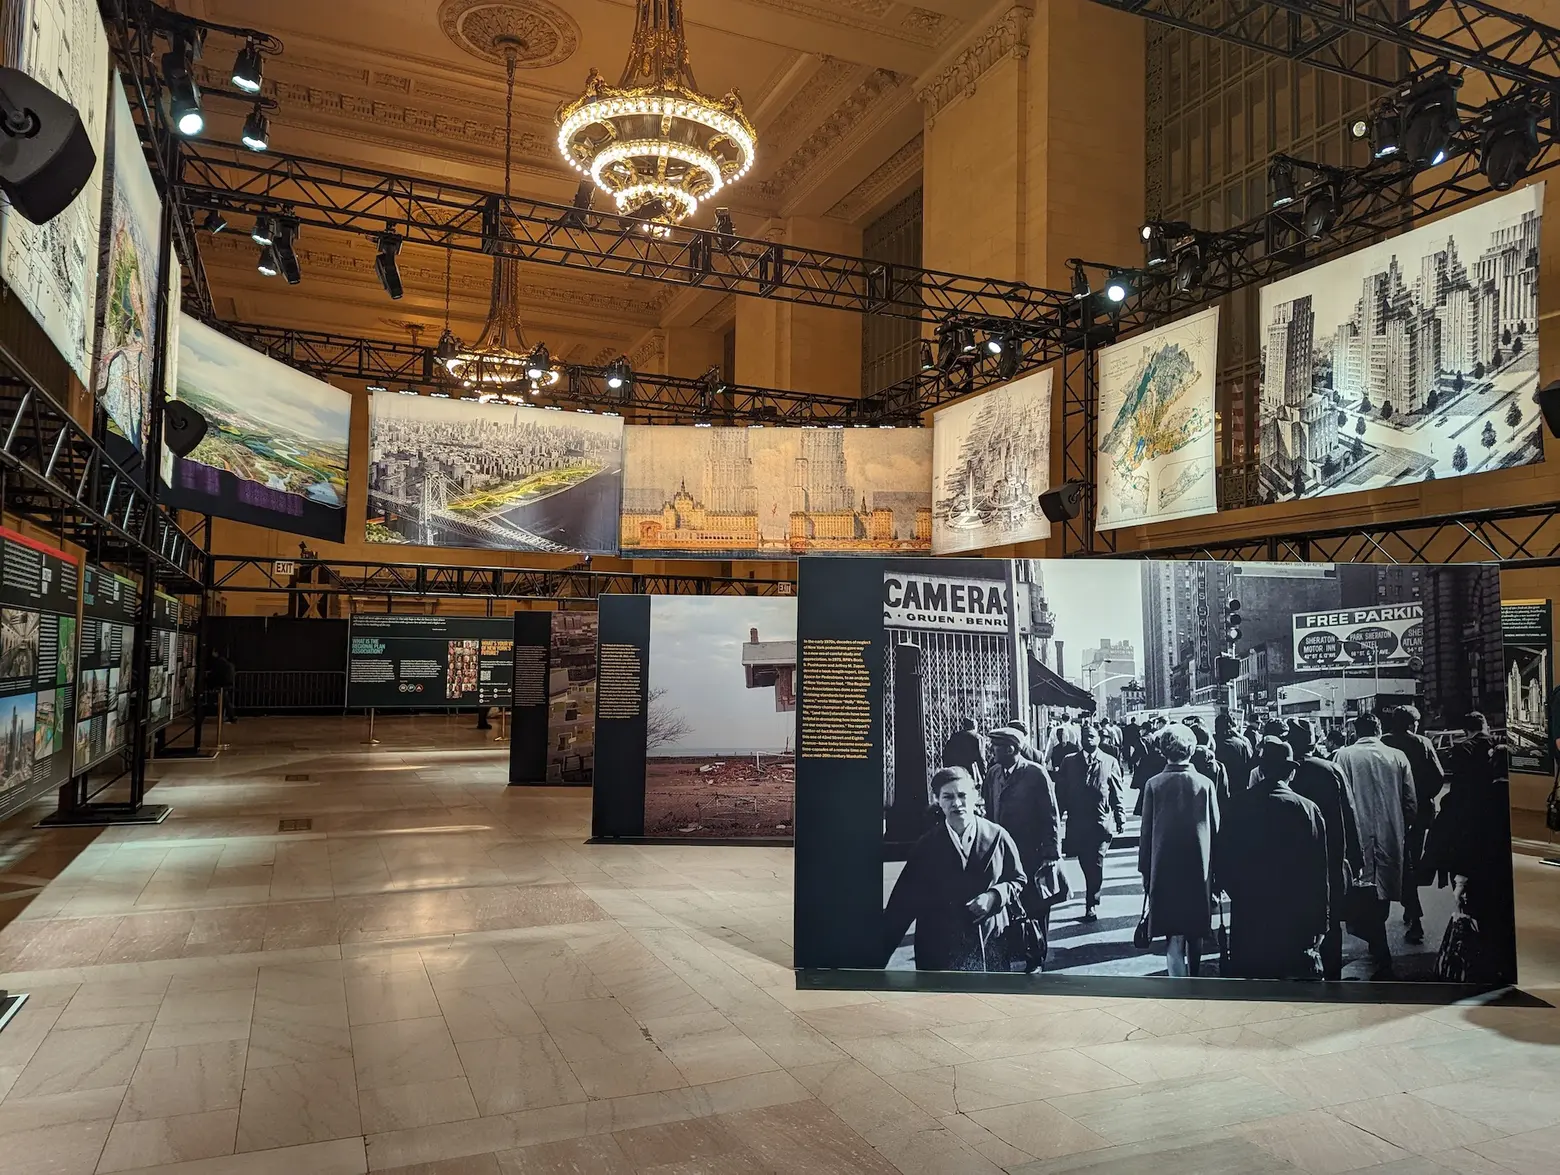 New exhibition at Grand Central traces 100 years of urban planning and design in NYC